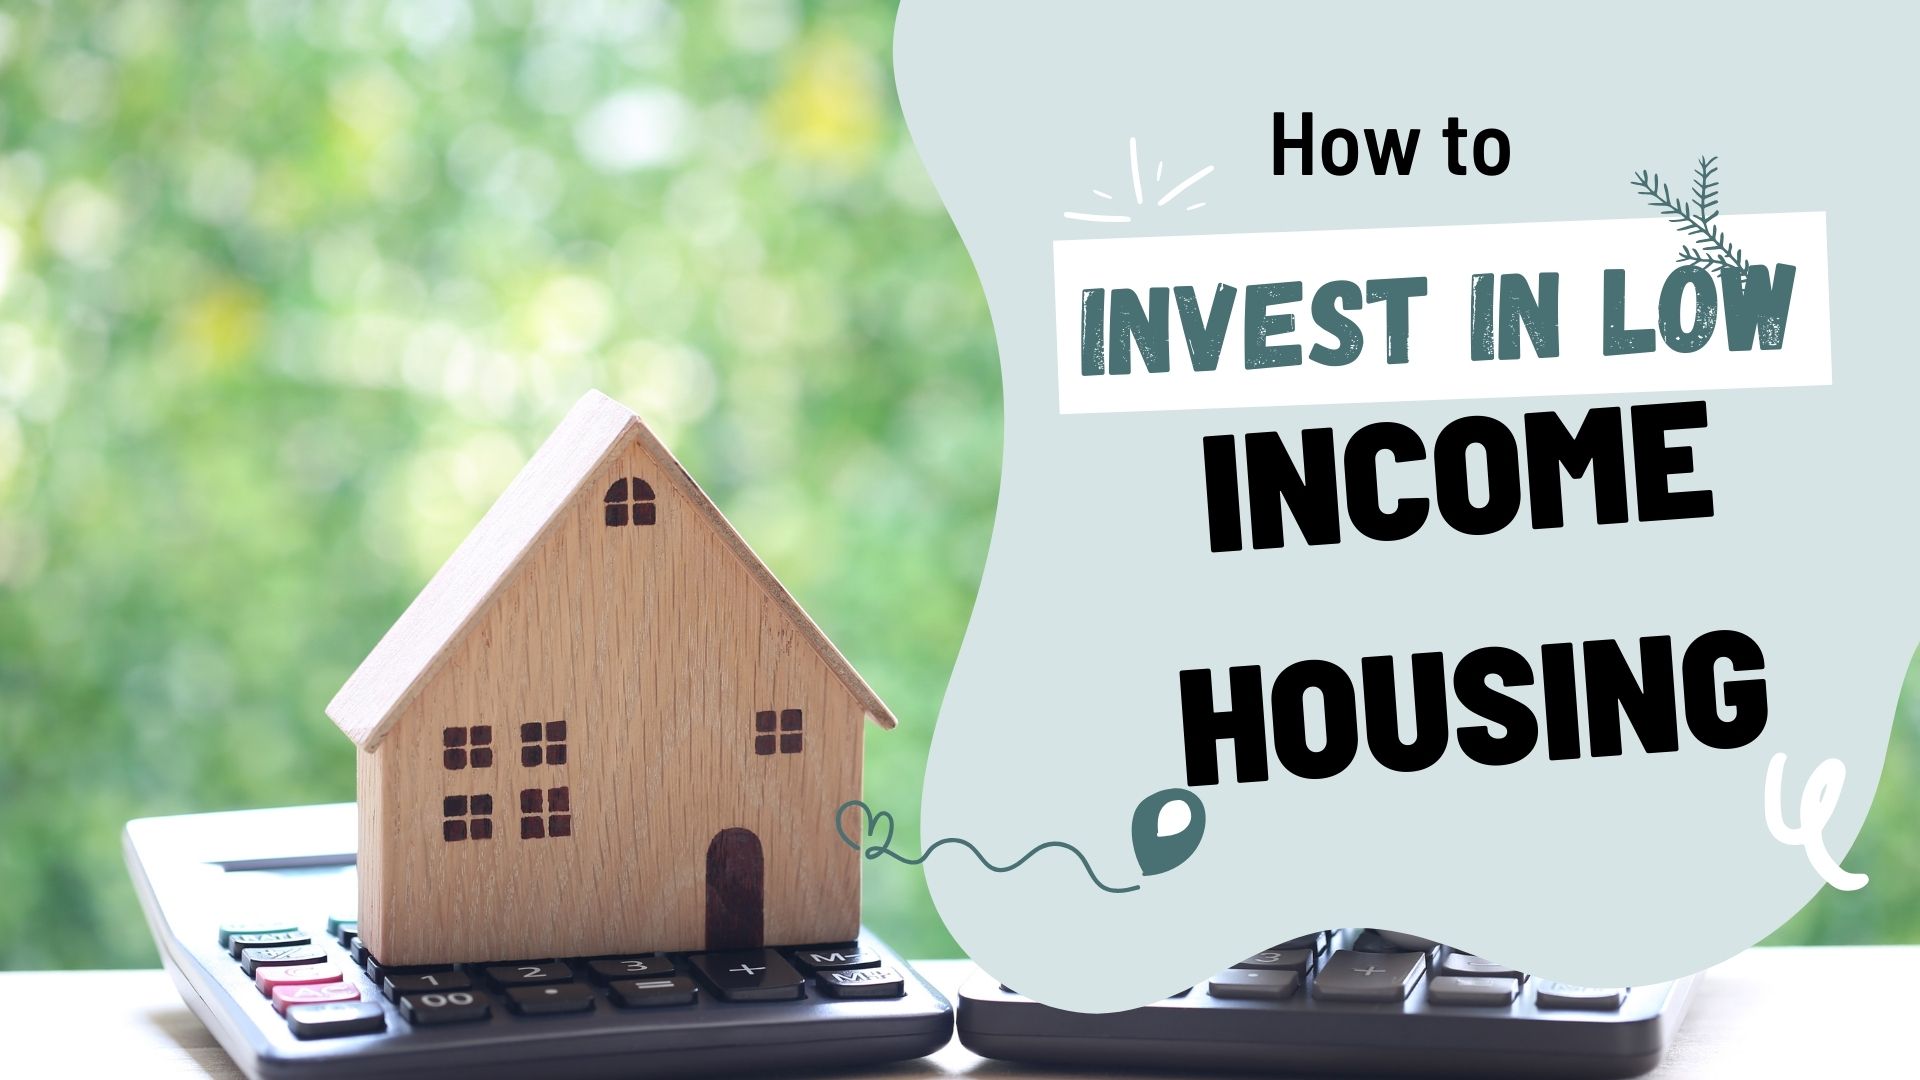 How to Invest in Low Income Housing